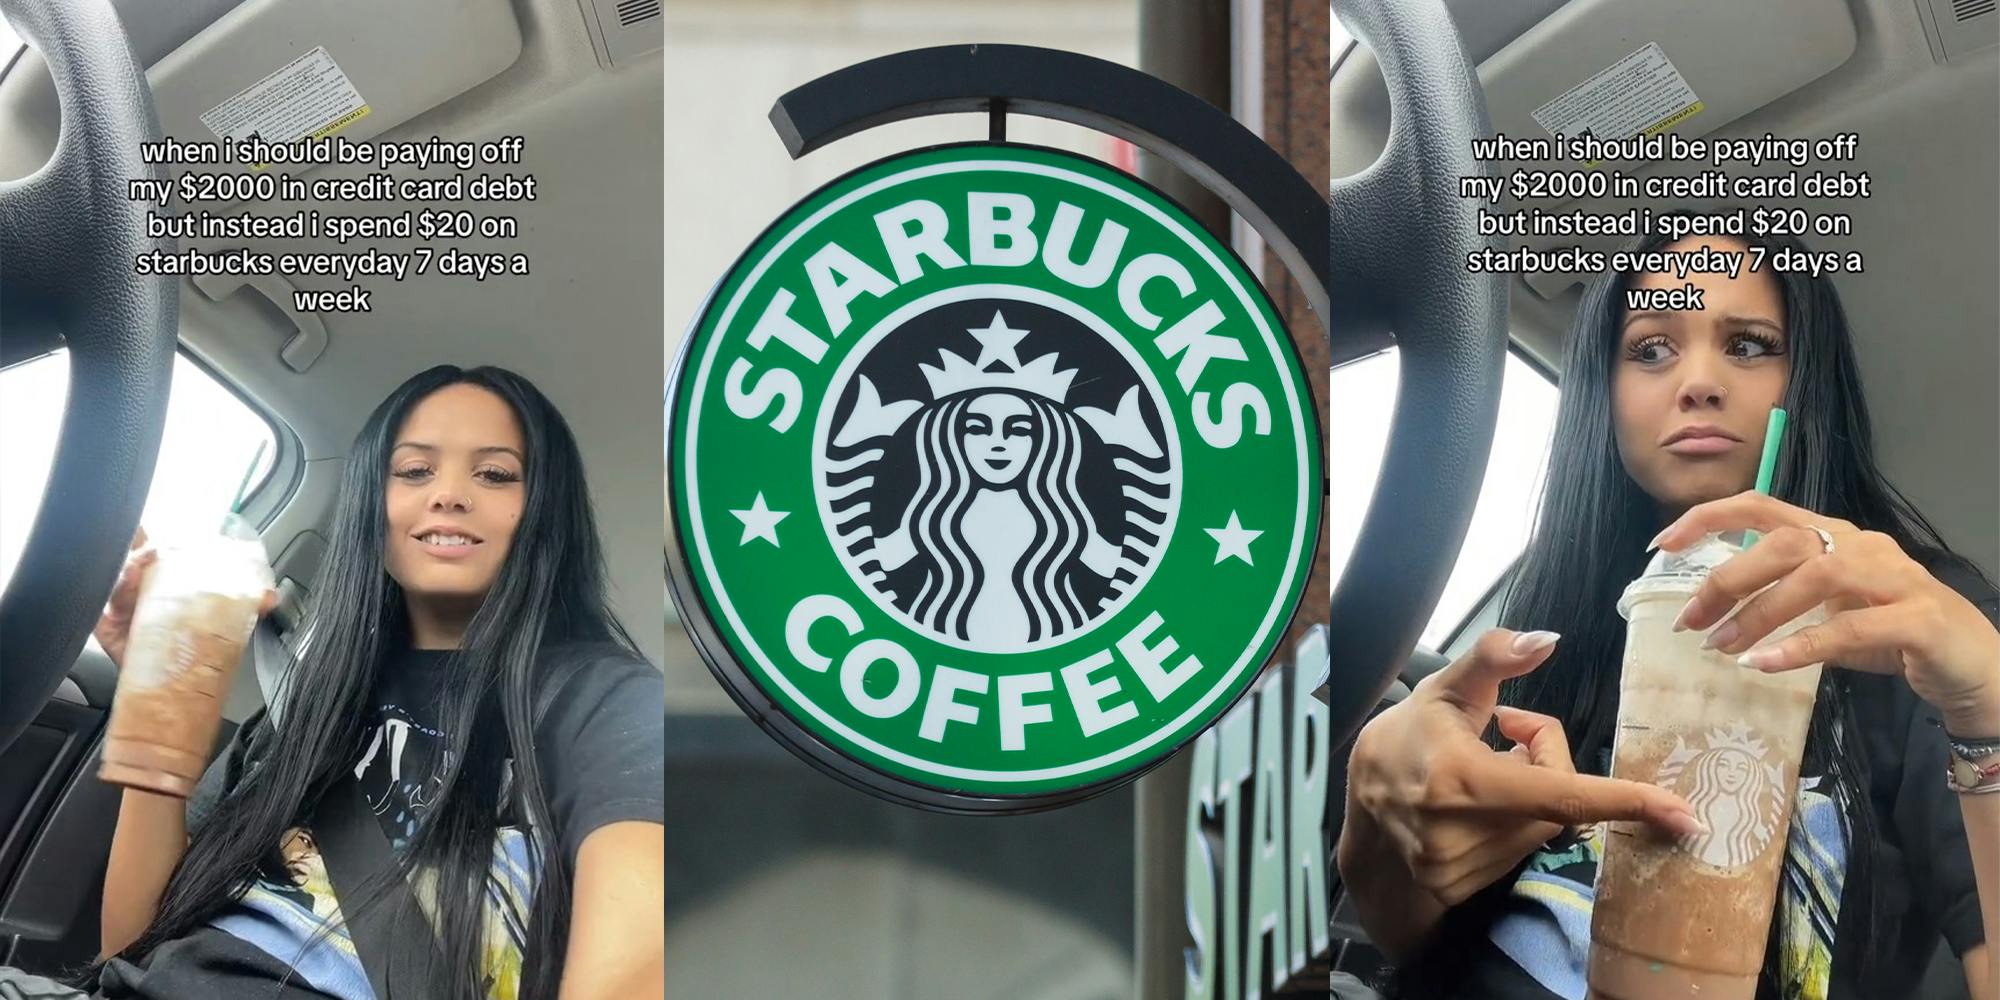 woman in vehicle holding Starbucks drink